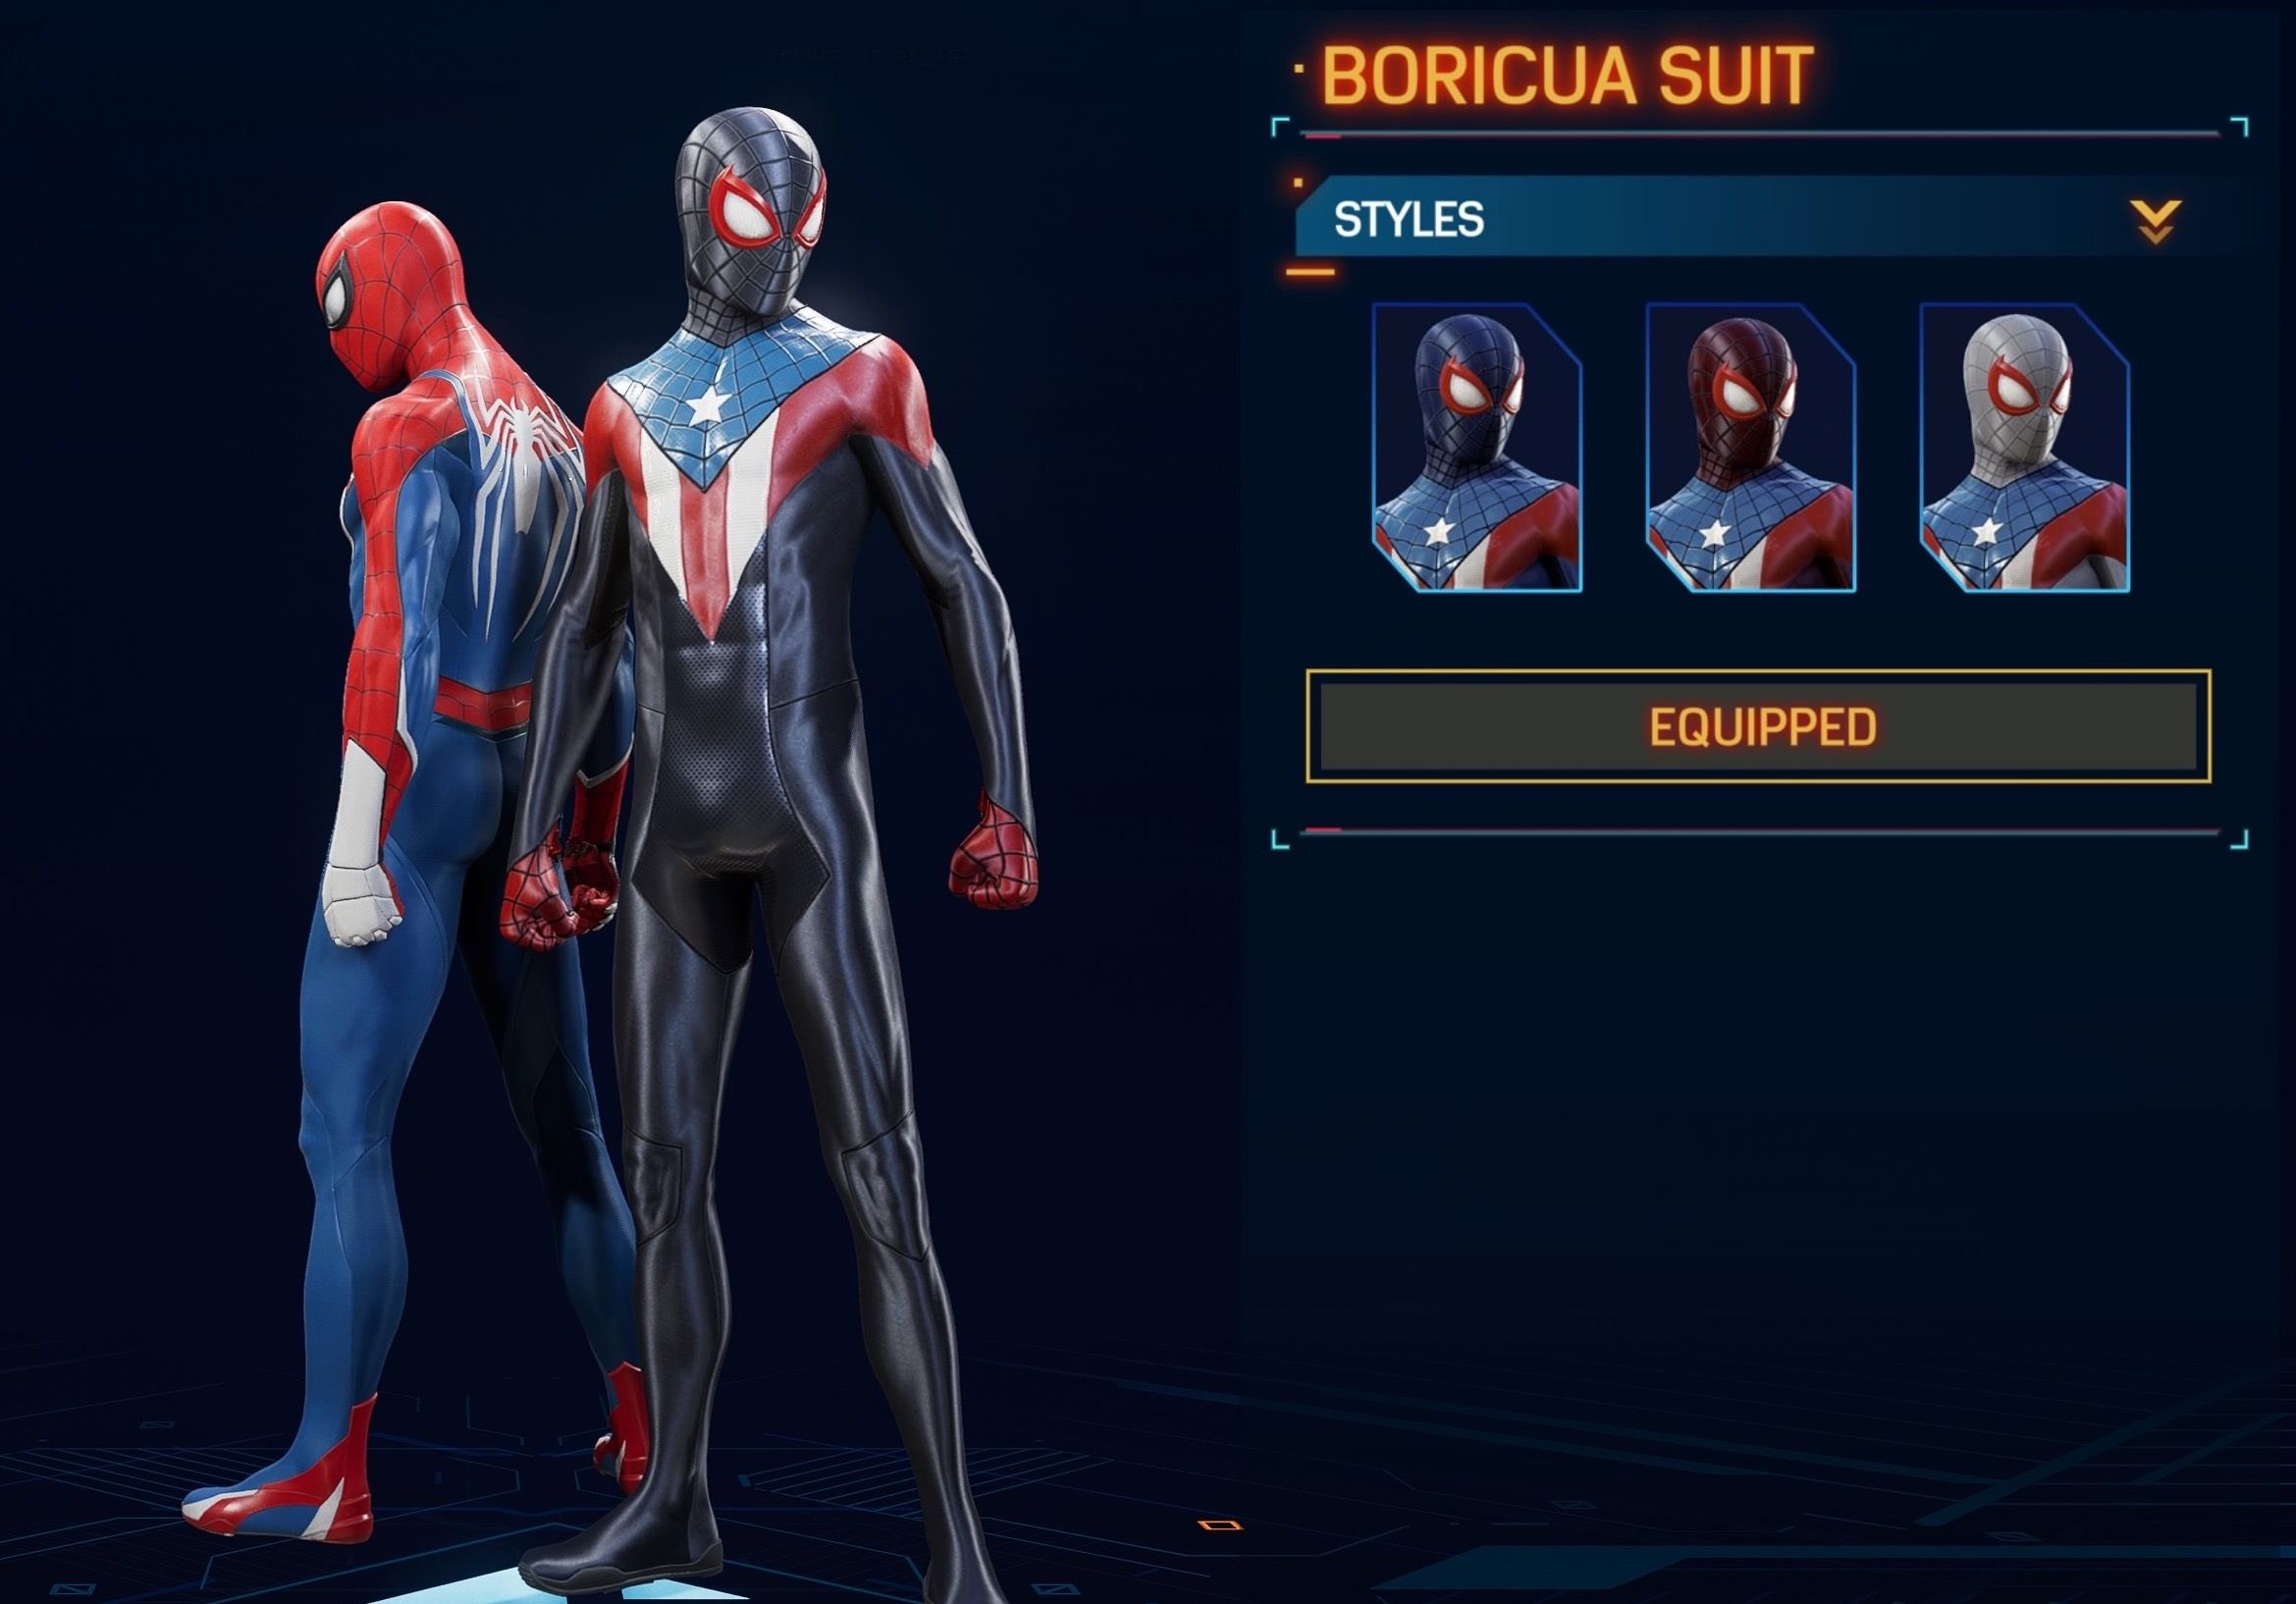 Screenshot showing a Spider-Man "boricua" costume that incorporates the design of the Puerto Rican flag